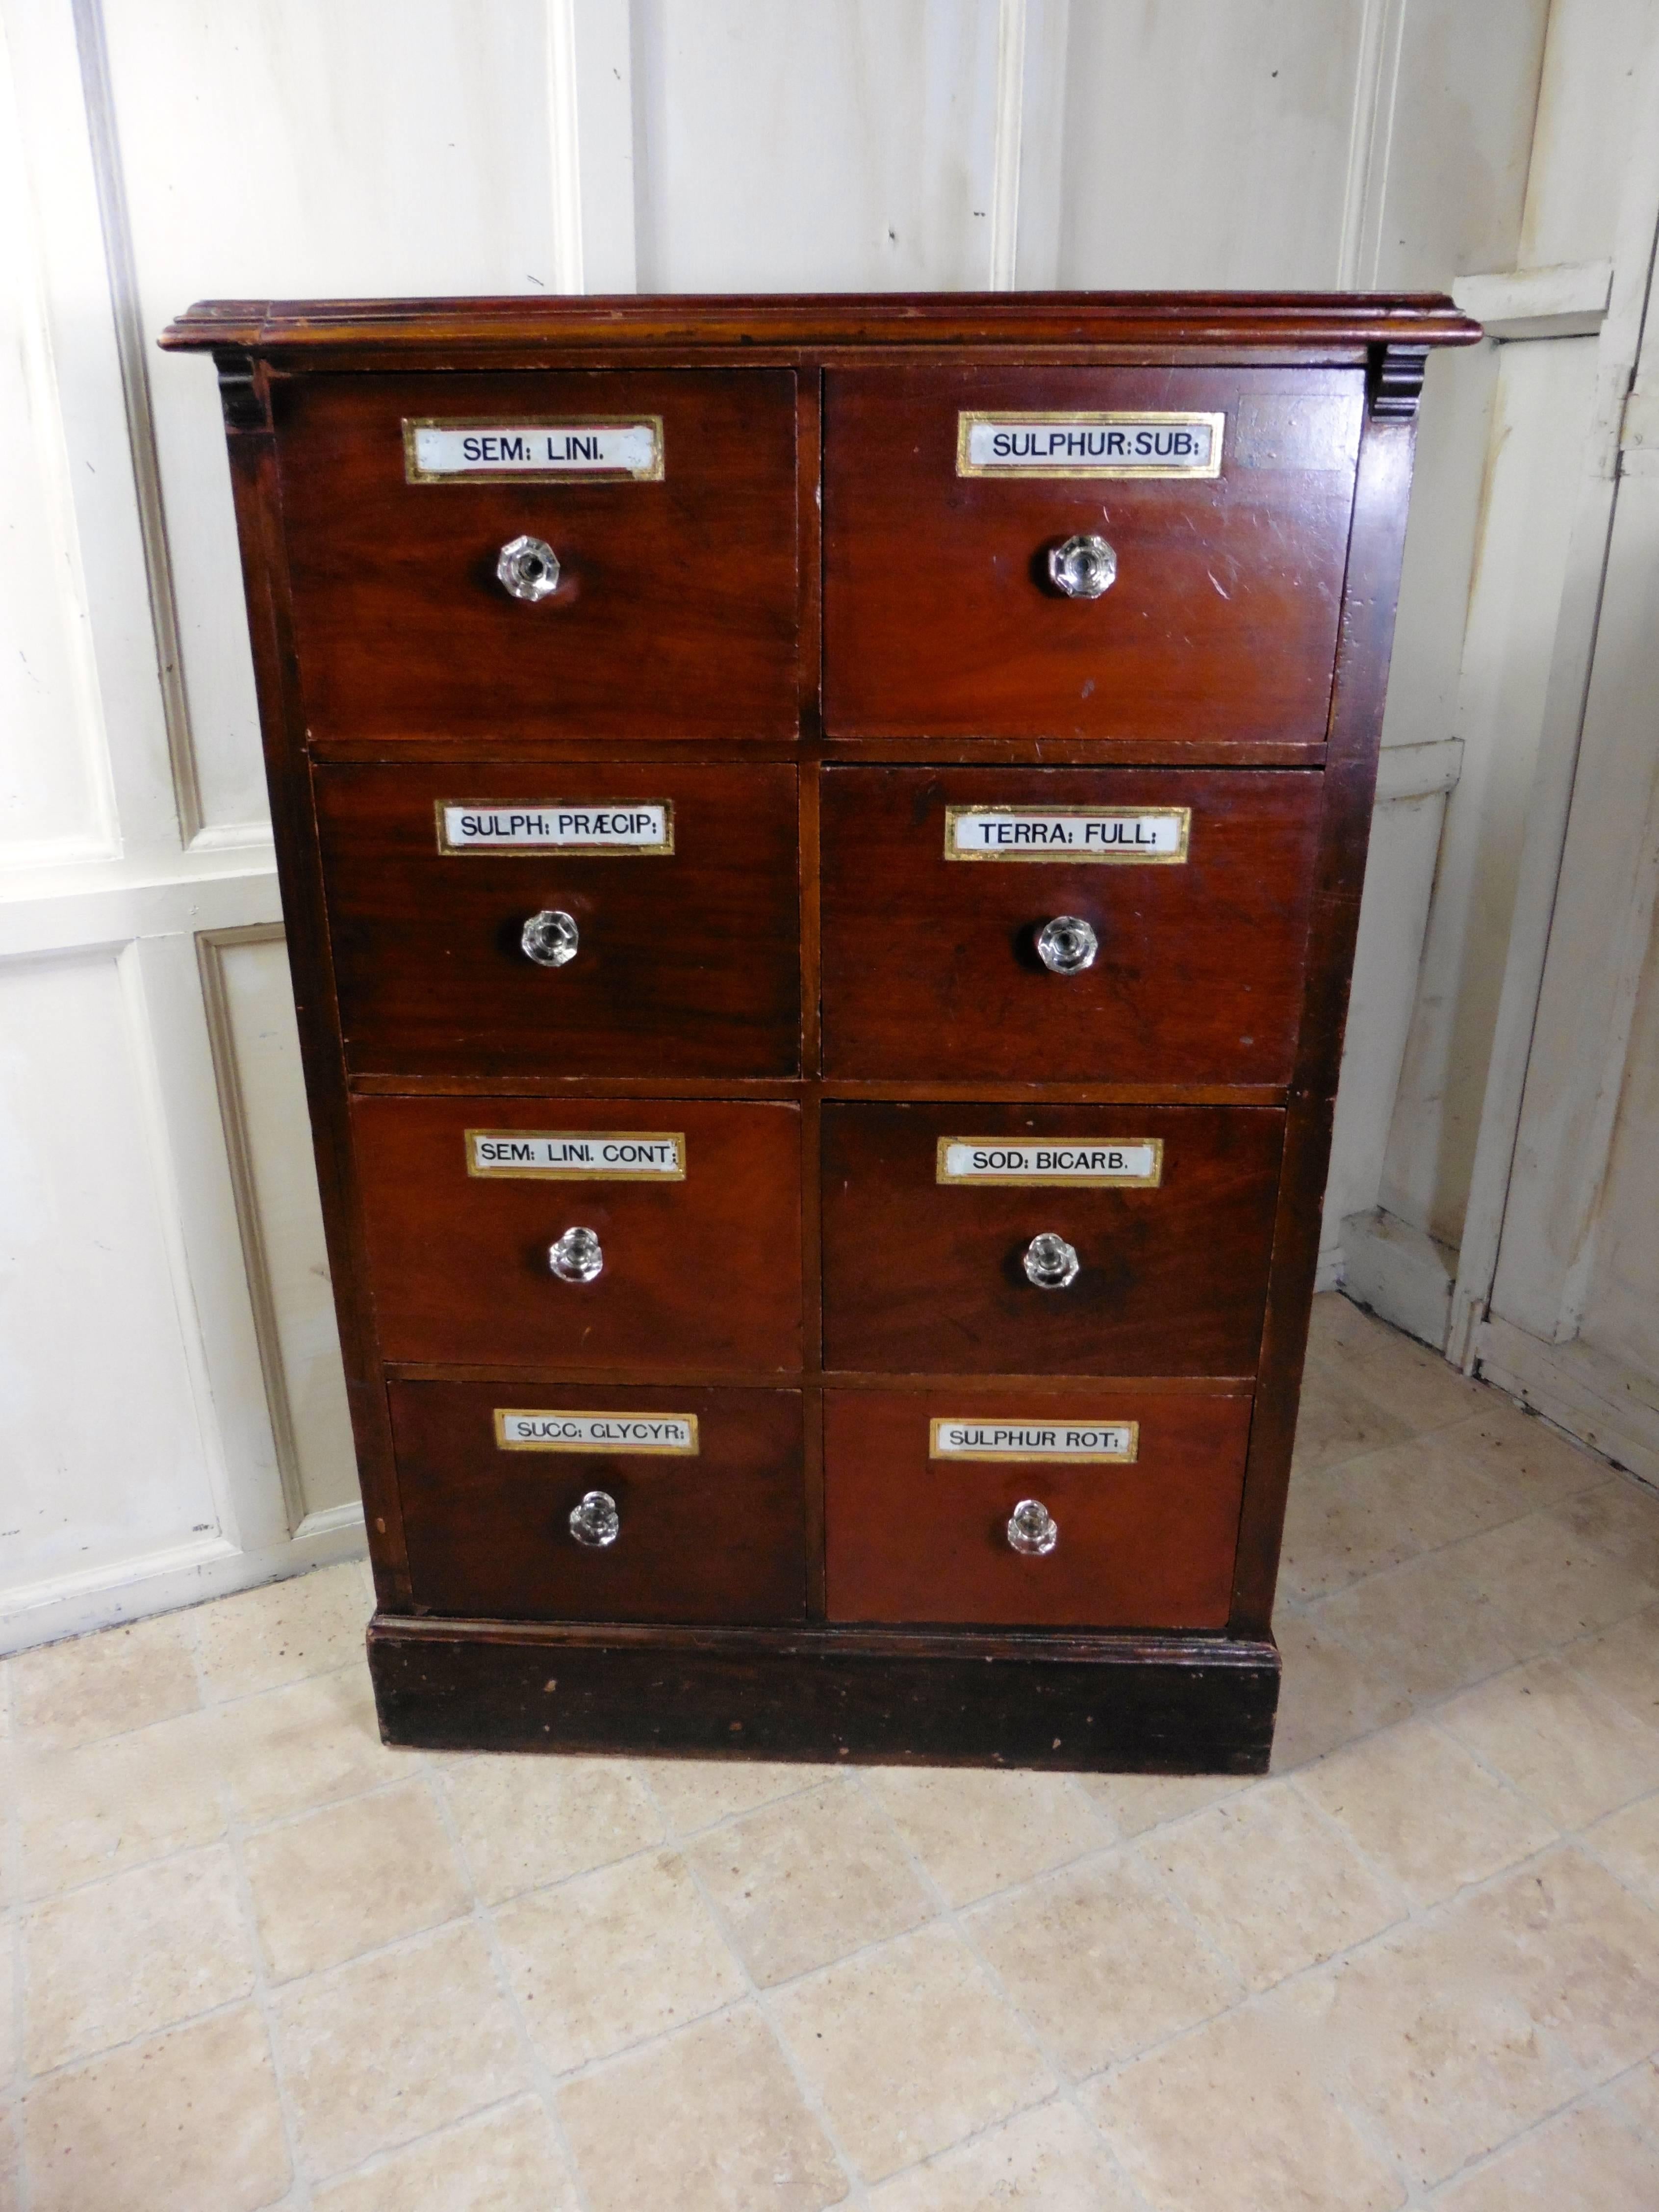 19th century chemist drawers, eight-drawer mahogany pharmacists cabinet

This is a delightful piece, it has been made in to a freestanding chest of drawers, originally it would have been part of a much larger wall fitting piece in a chemist shop.